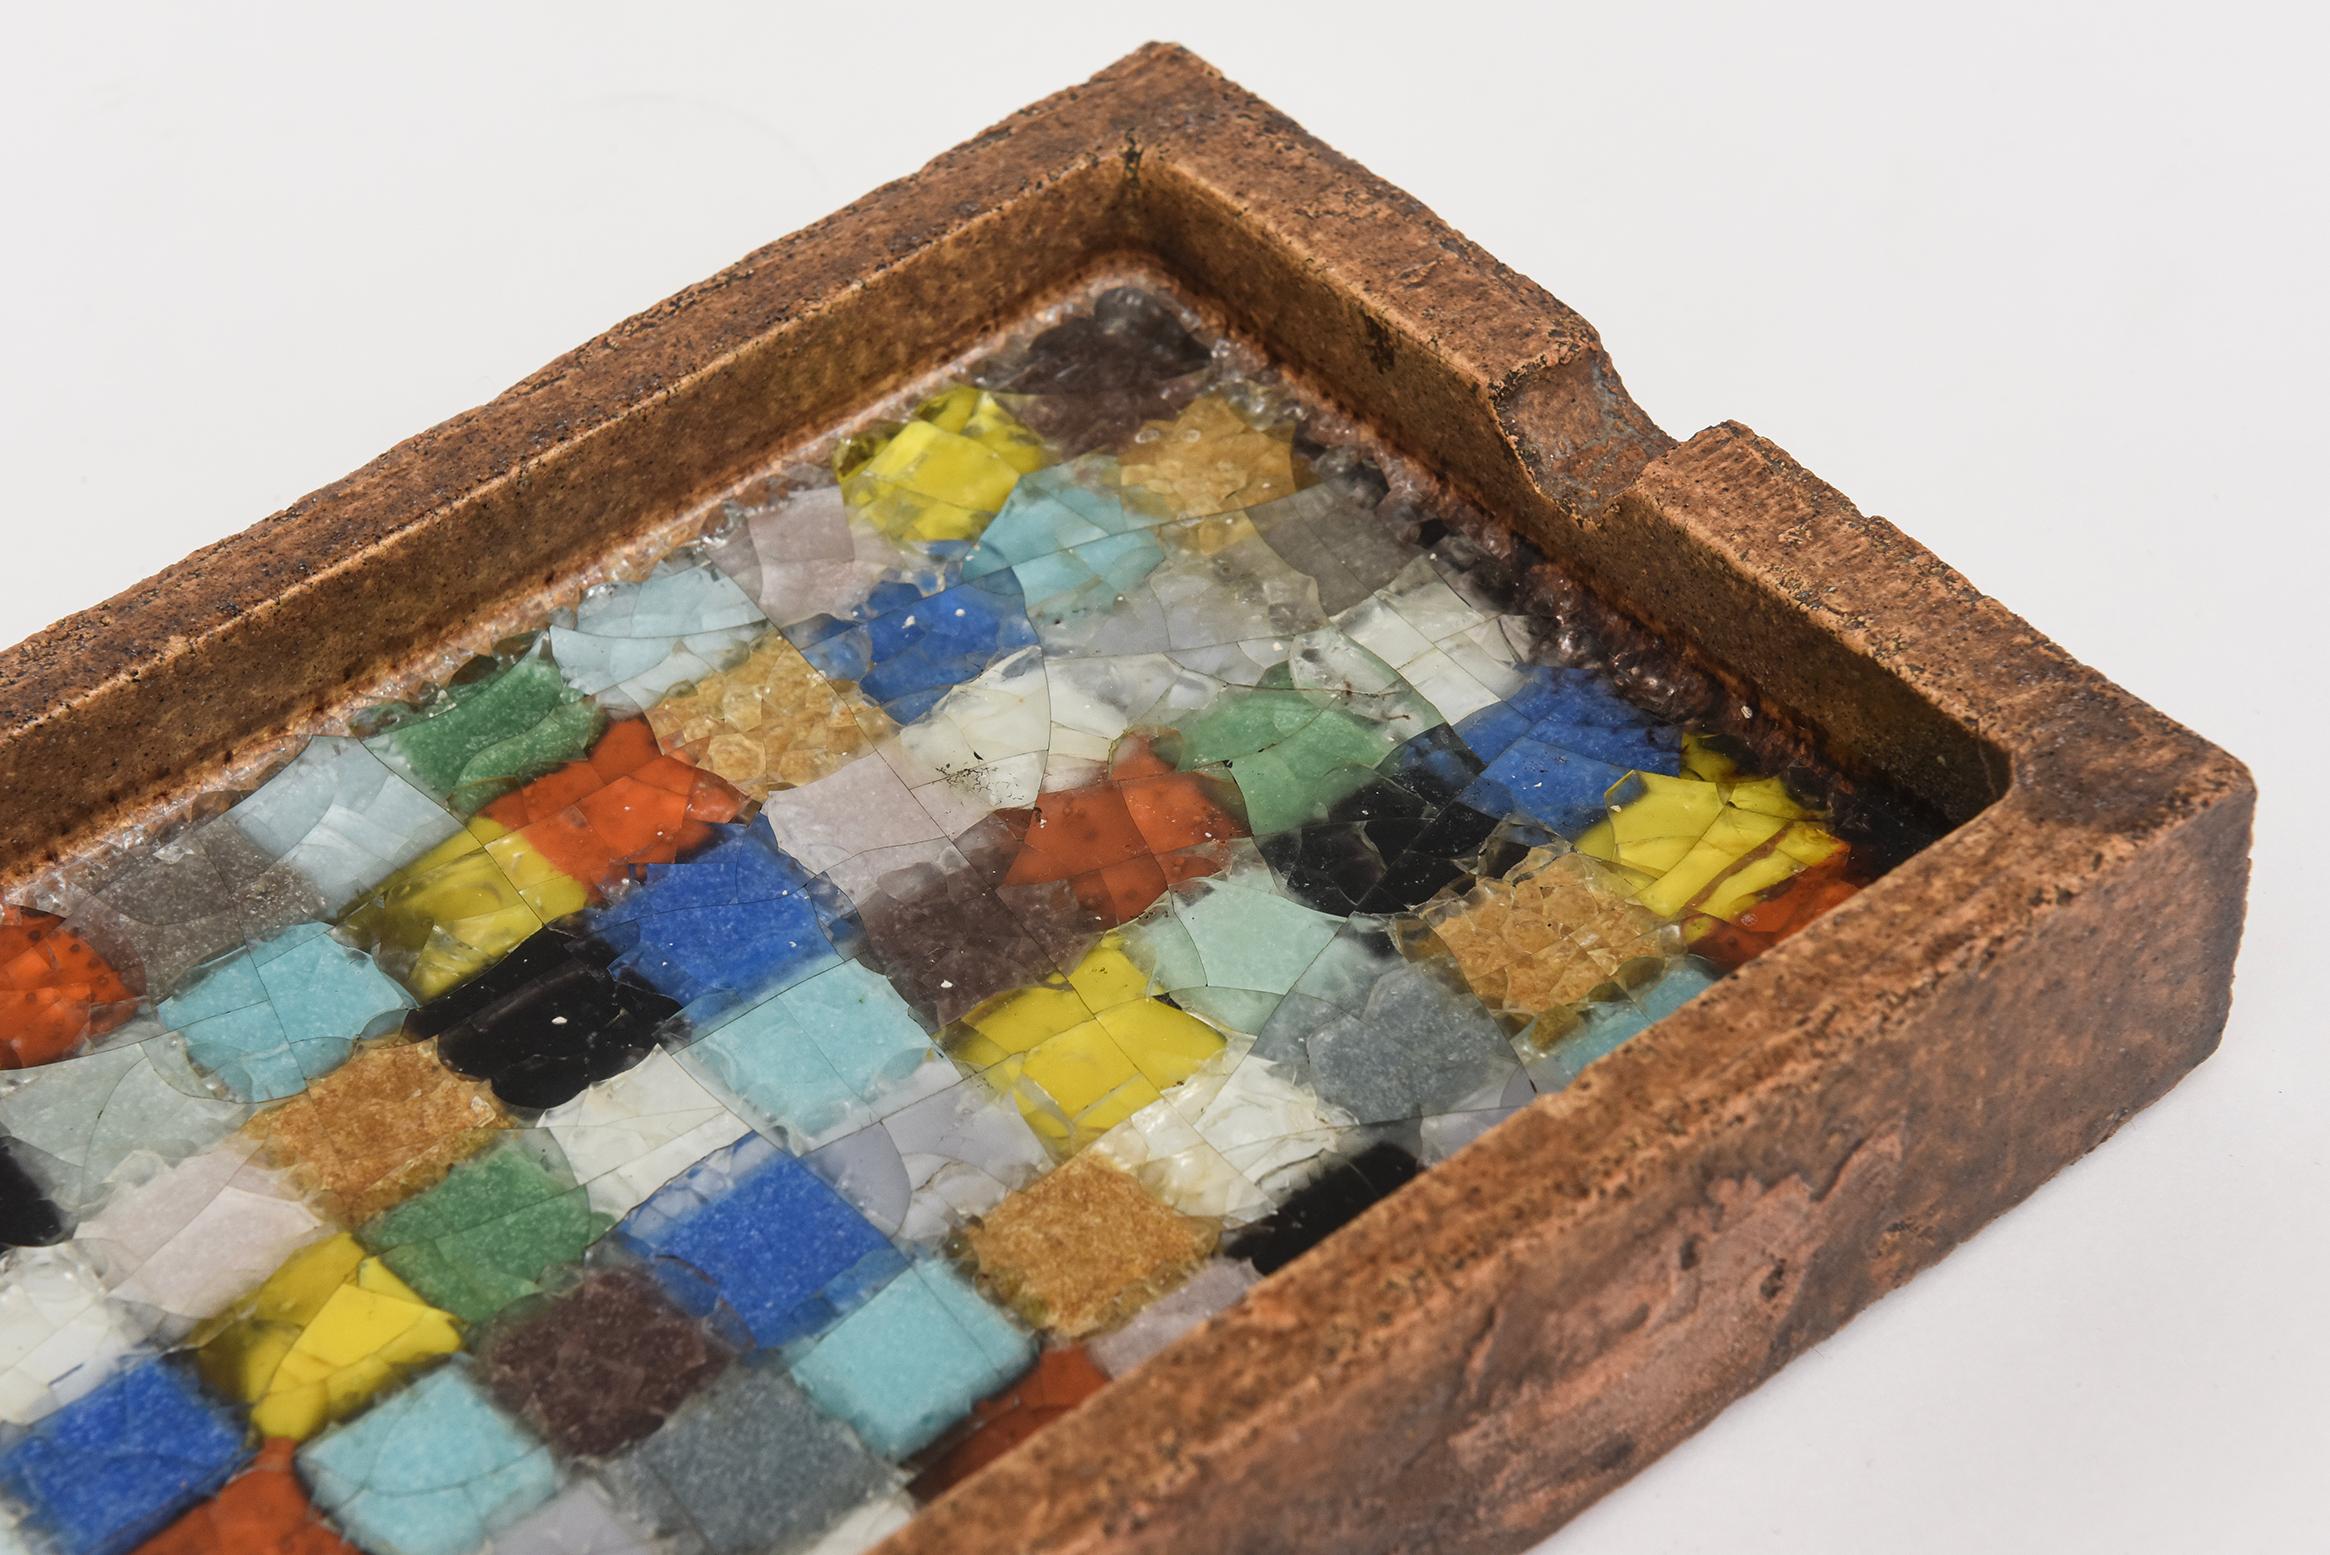 Mid-20th Century 60s Italian Ceramic and Fused Glass Mosaic Ashtray / Tray by Bitossi for Raymor For Sale